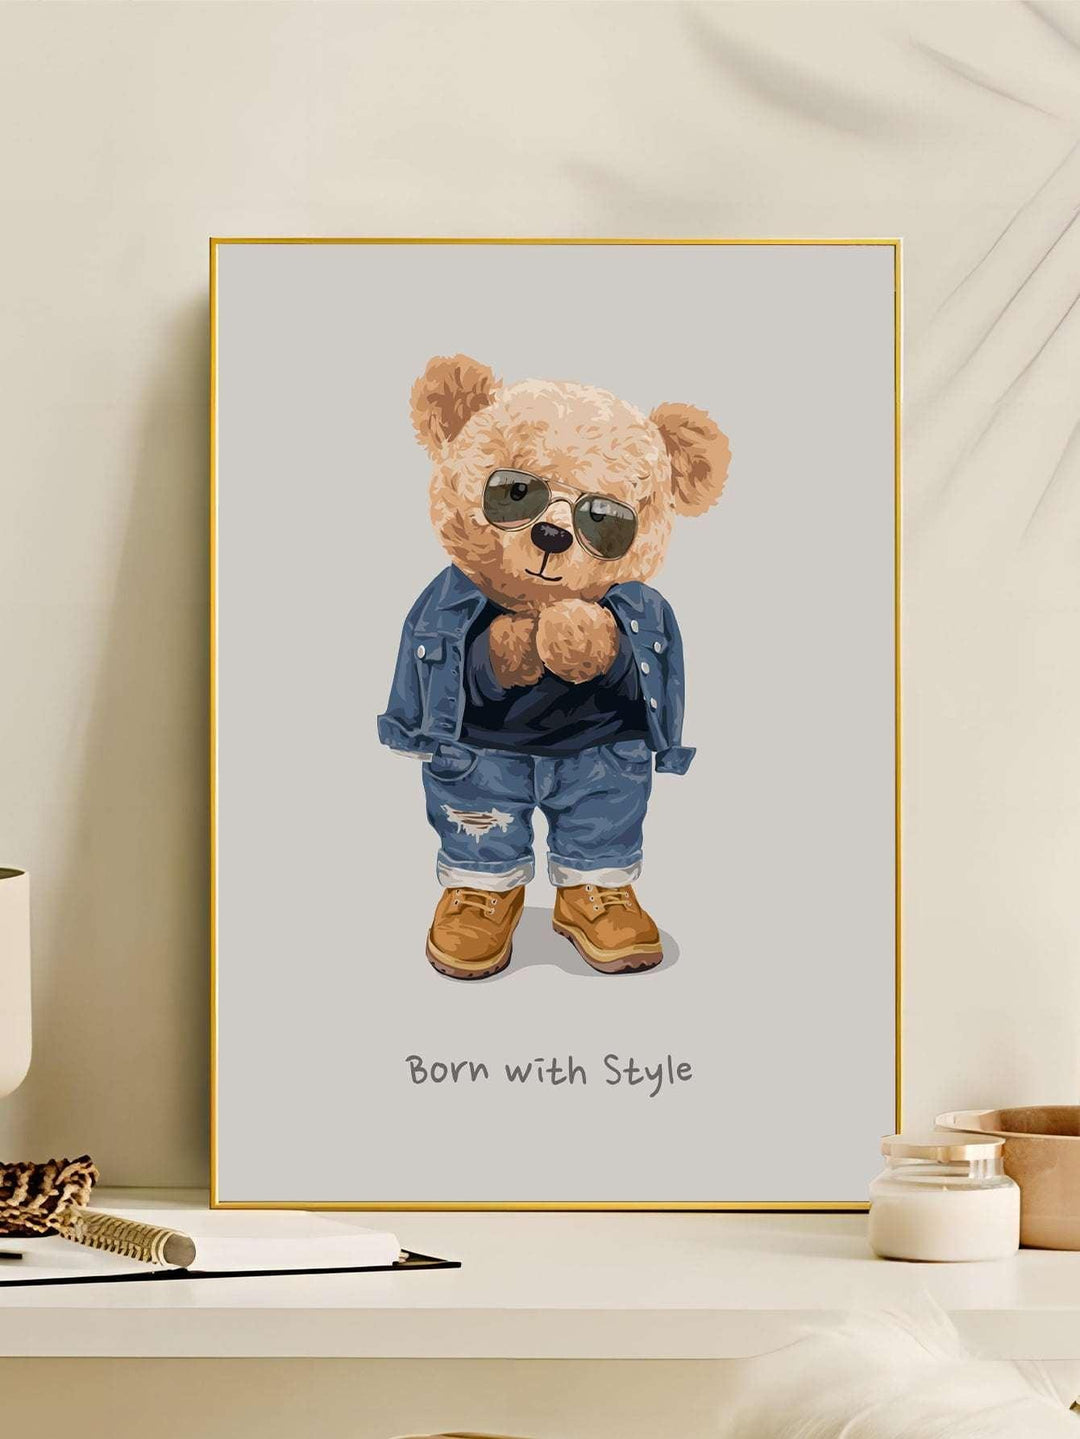 1pc Chemical Fiber Framed Painting Cartoon Bear Pattern Wall Art Painting For Home Wall Decor - Brand My Case